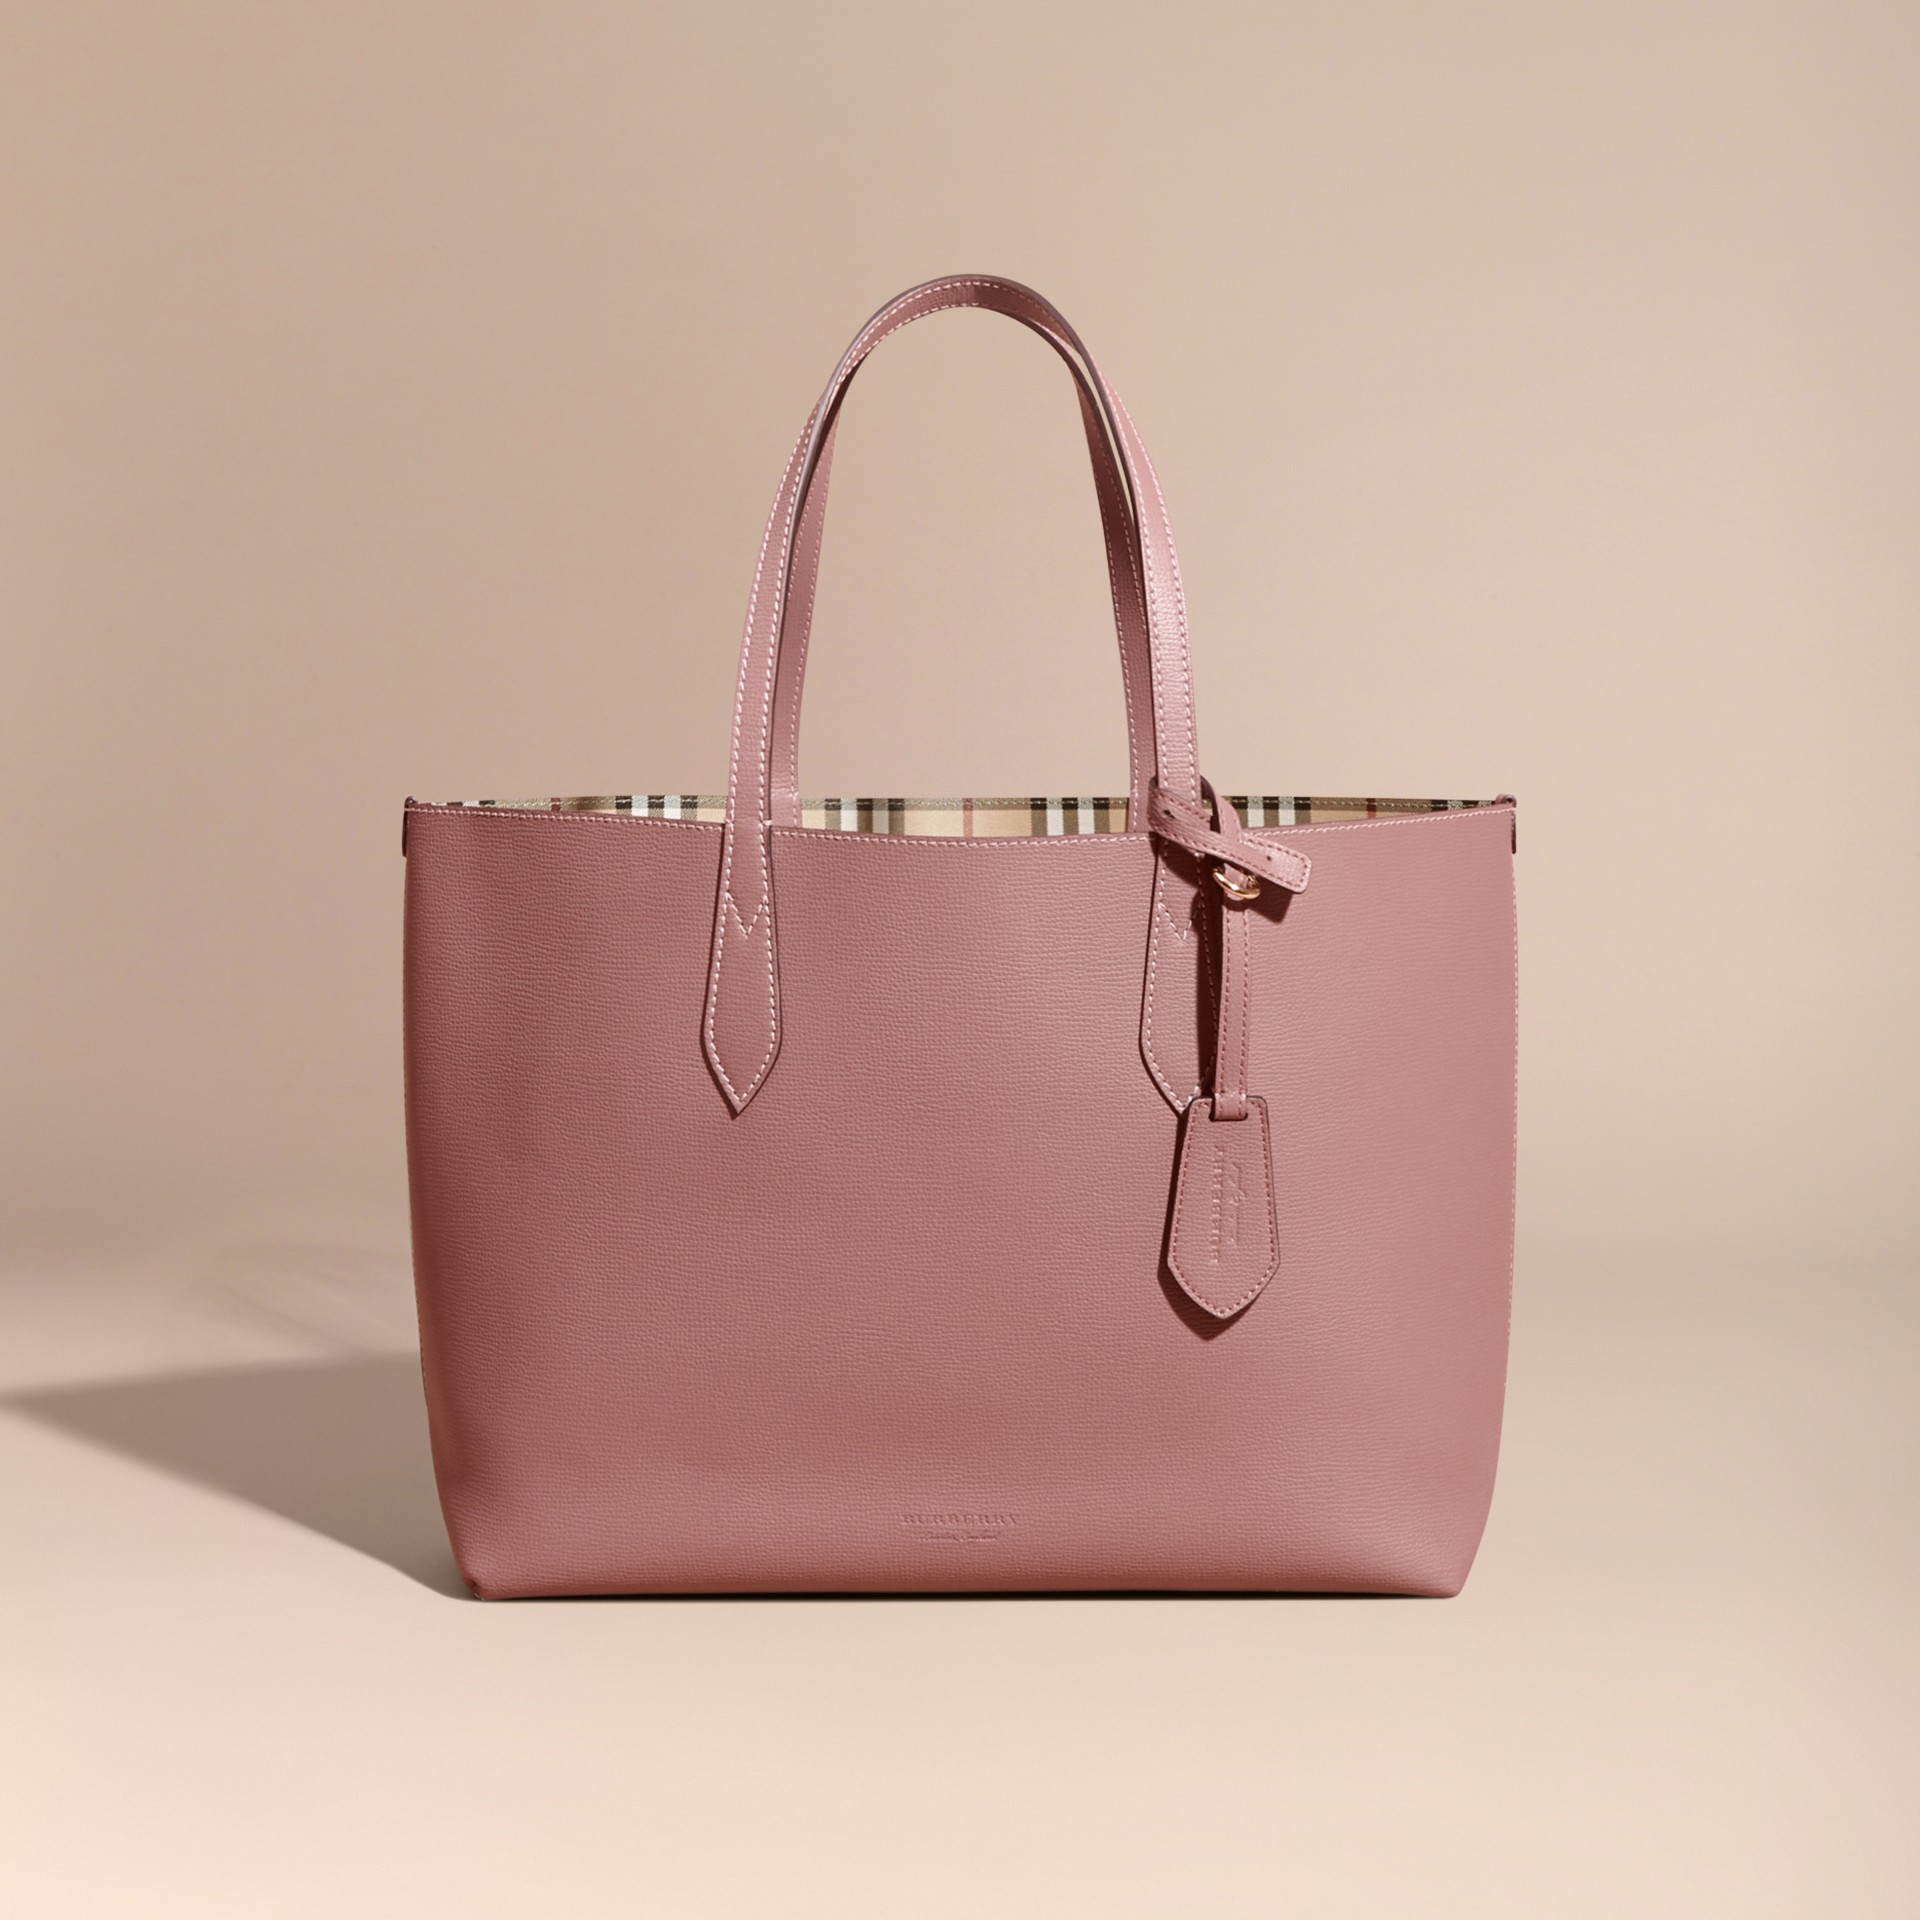 The Medium Reversible Tote in Haymarket Check and Leather in Light ...